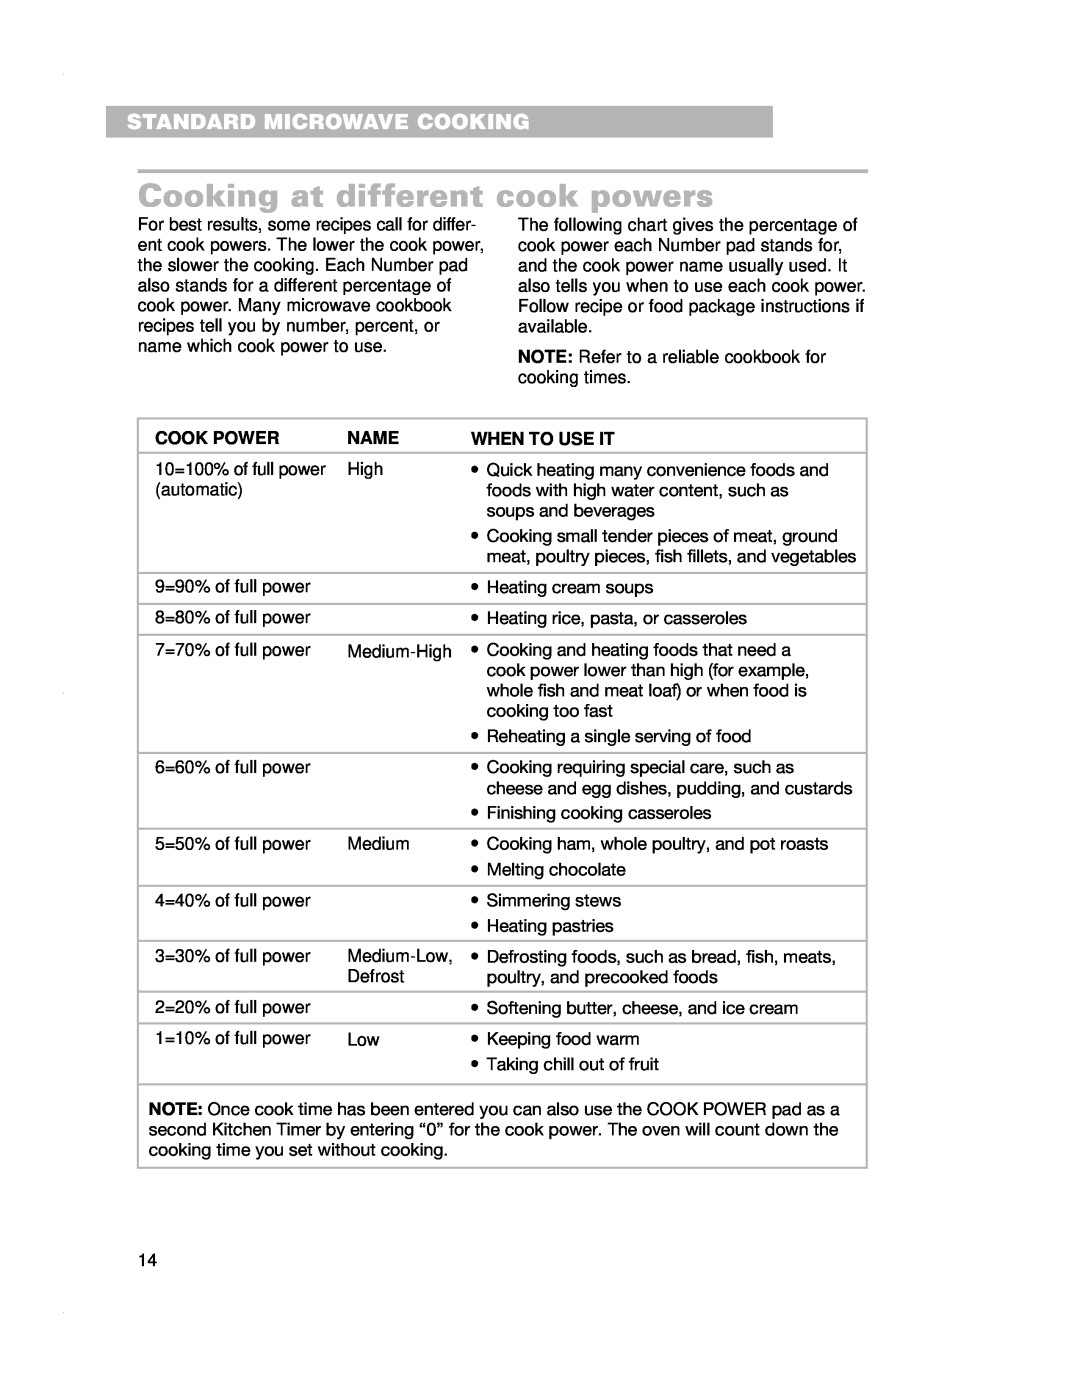 Crosley CMT135SG installation instructions Cooking at different cook powers, Standard Microwave Cooking 